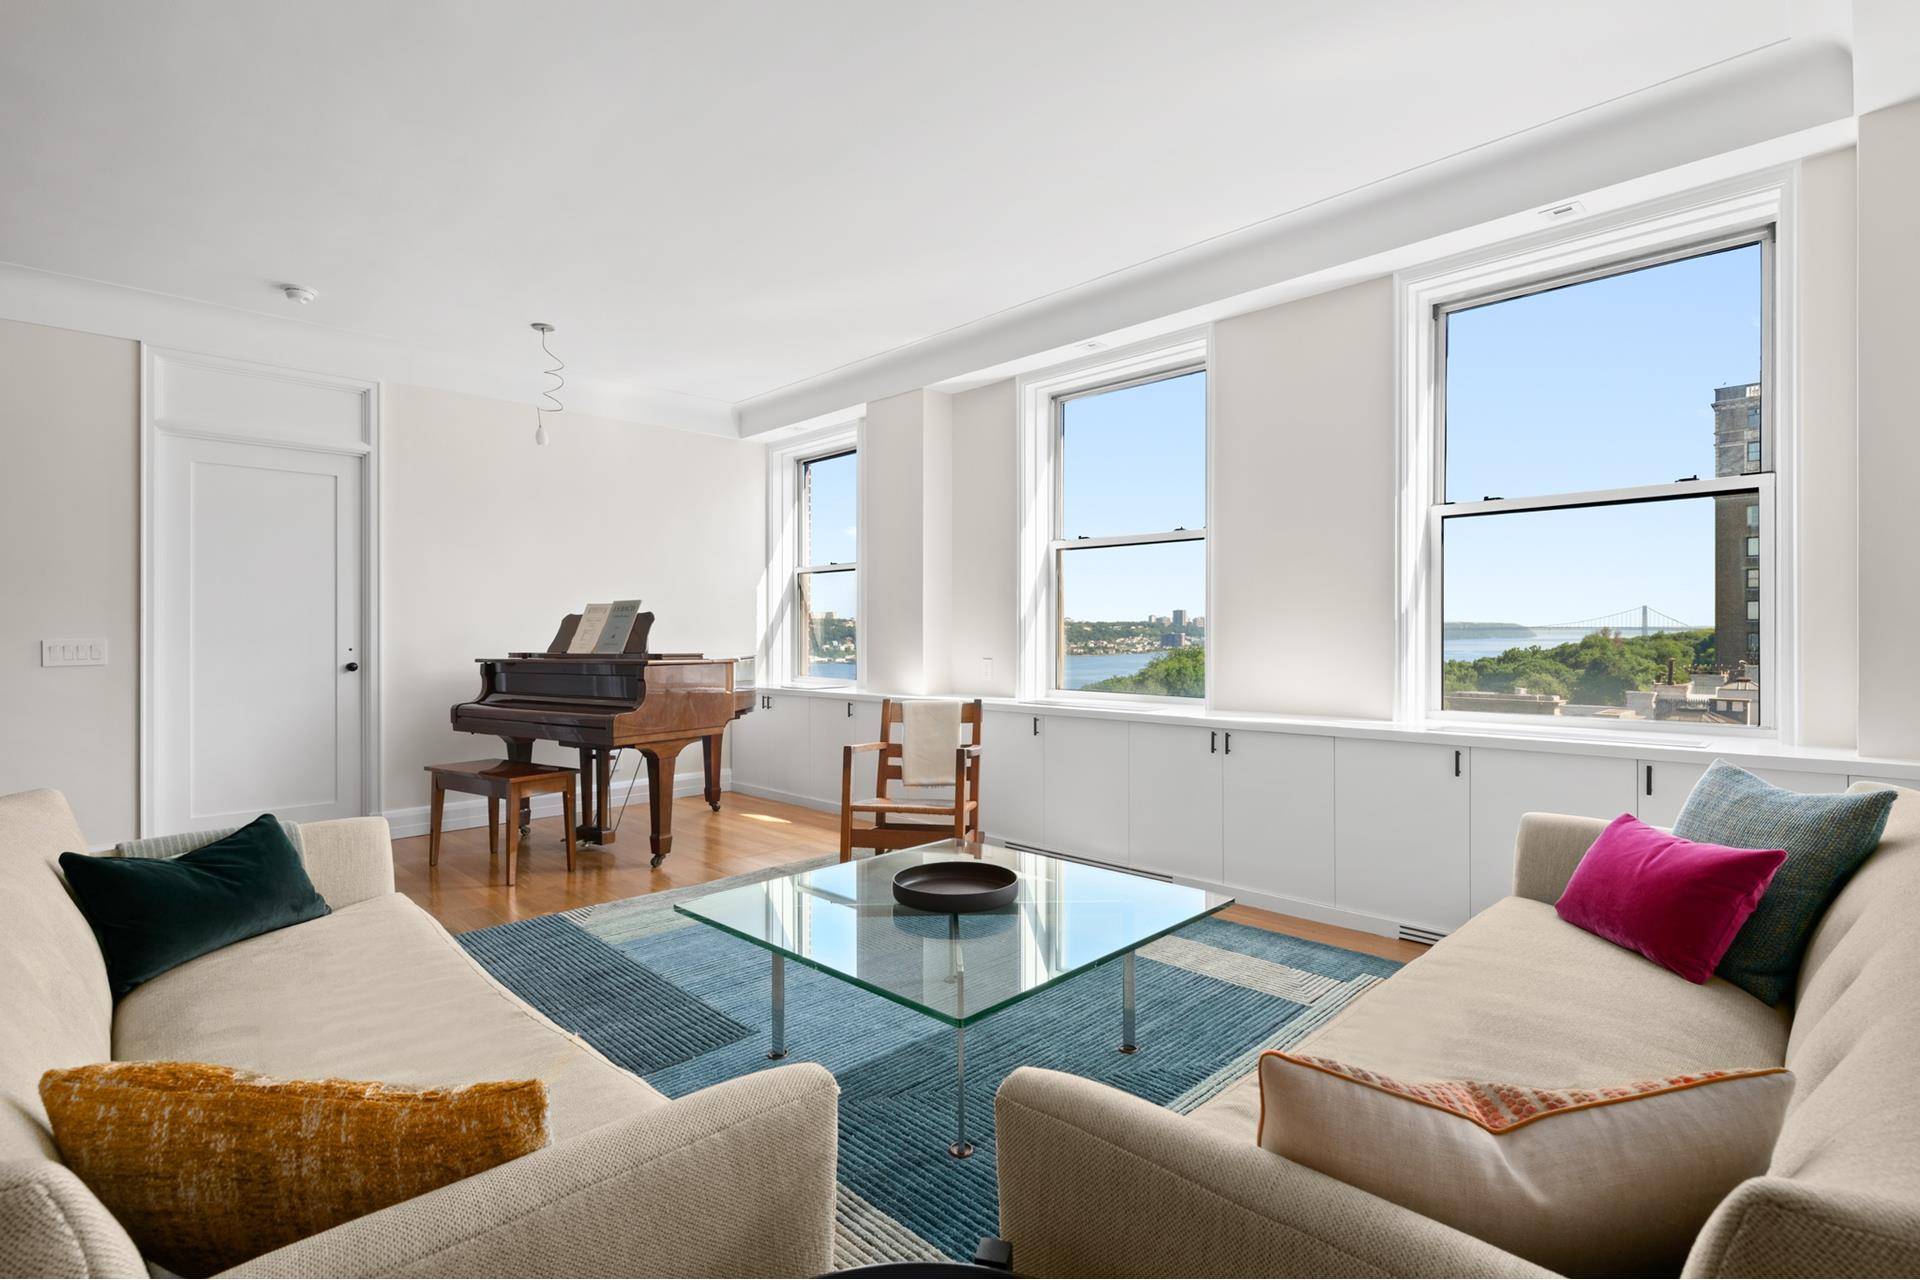 Welcome home to this gorgeous, completely re imagined 3BR 2BA residence with extraordinary views of Riverside Park, the Hudson River and the George Washington Bridge.